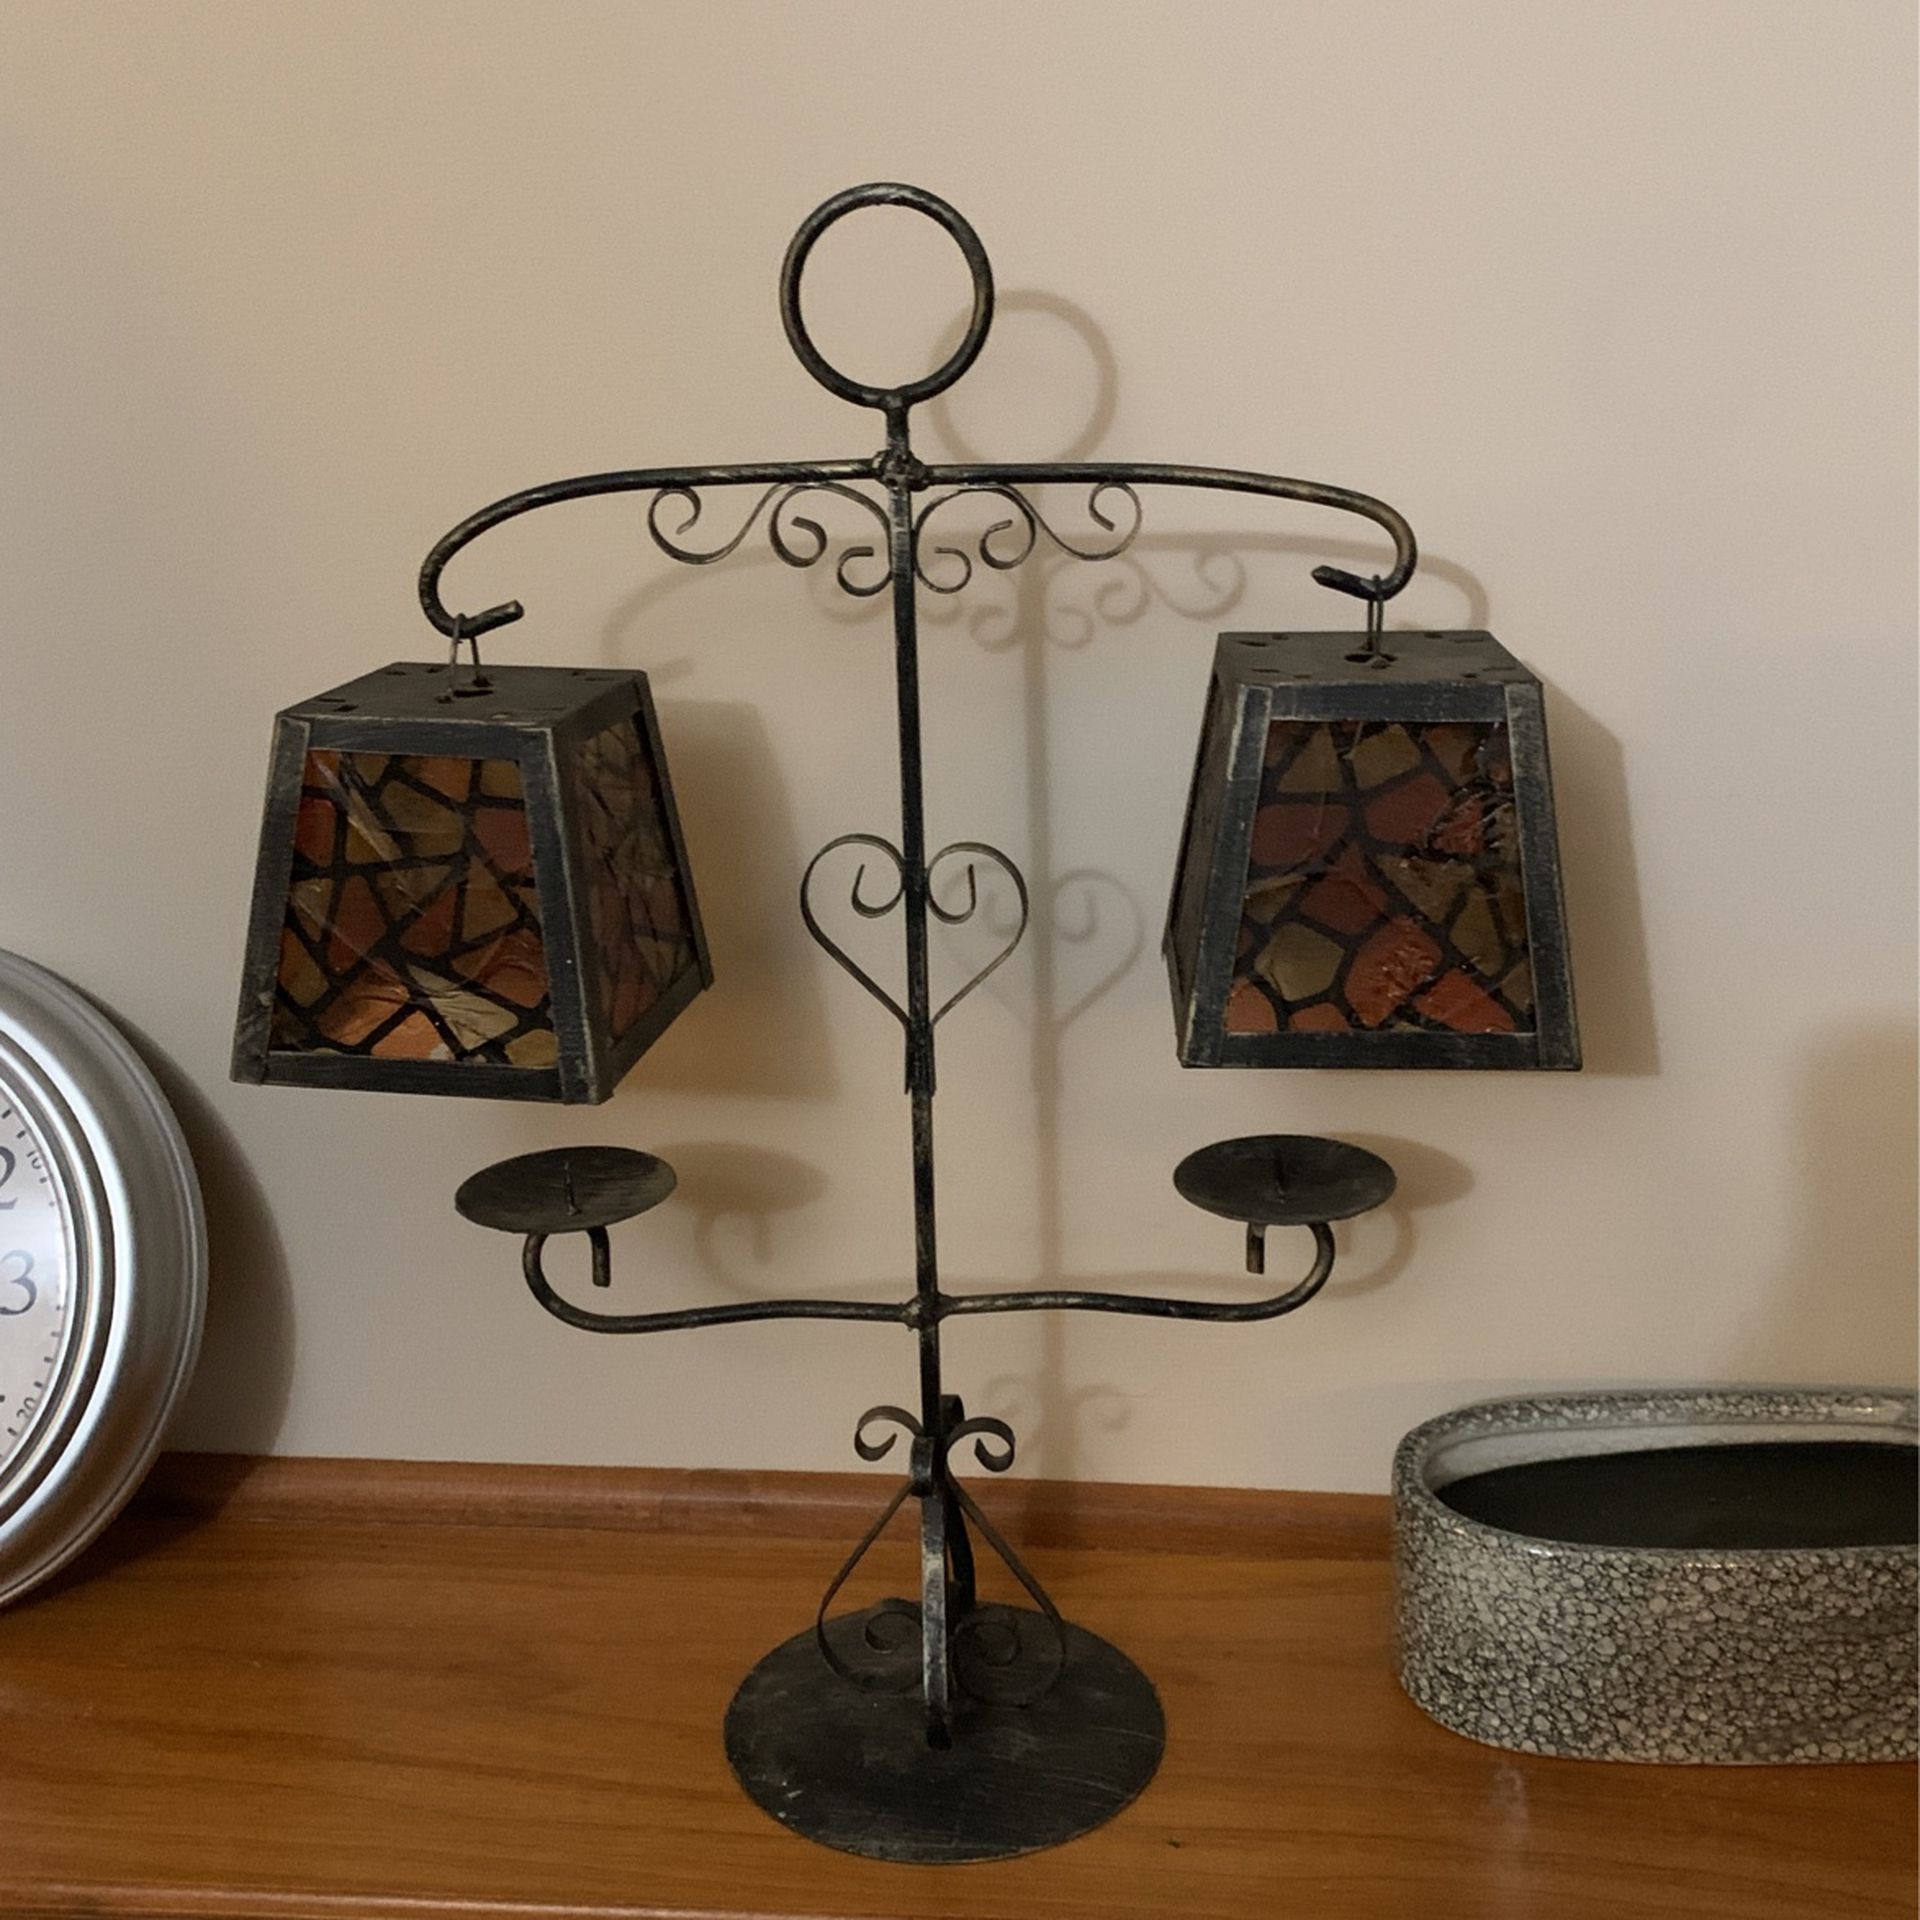 Wrought Iron, Stain Glass Shades Over Candle Holders